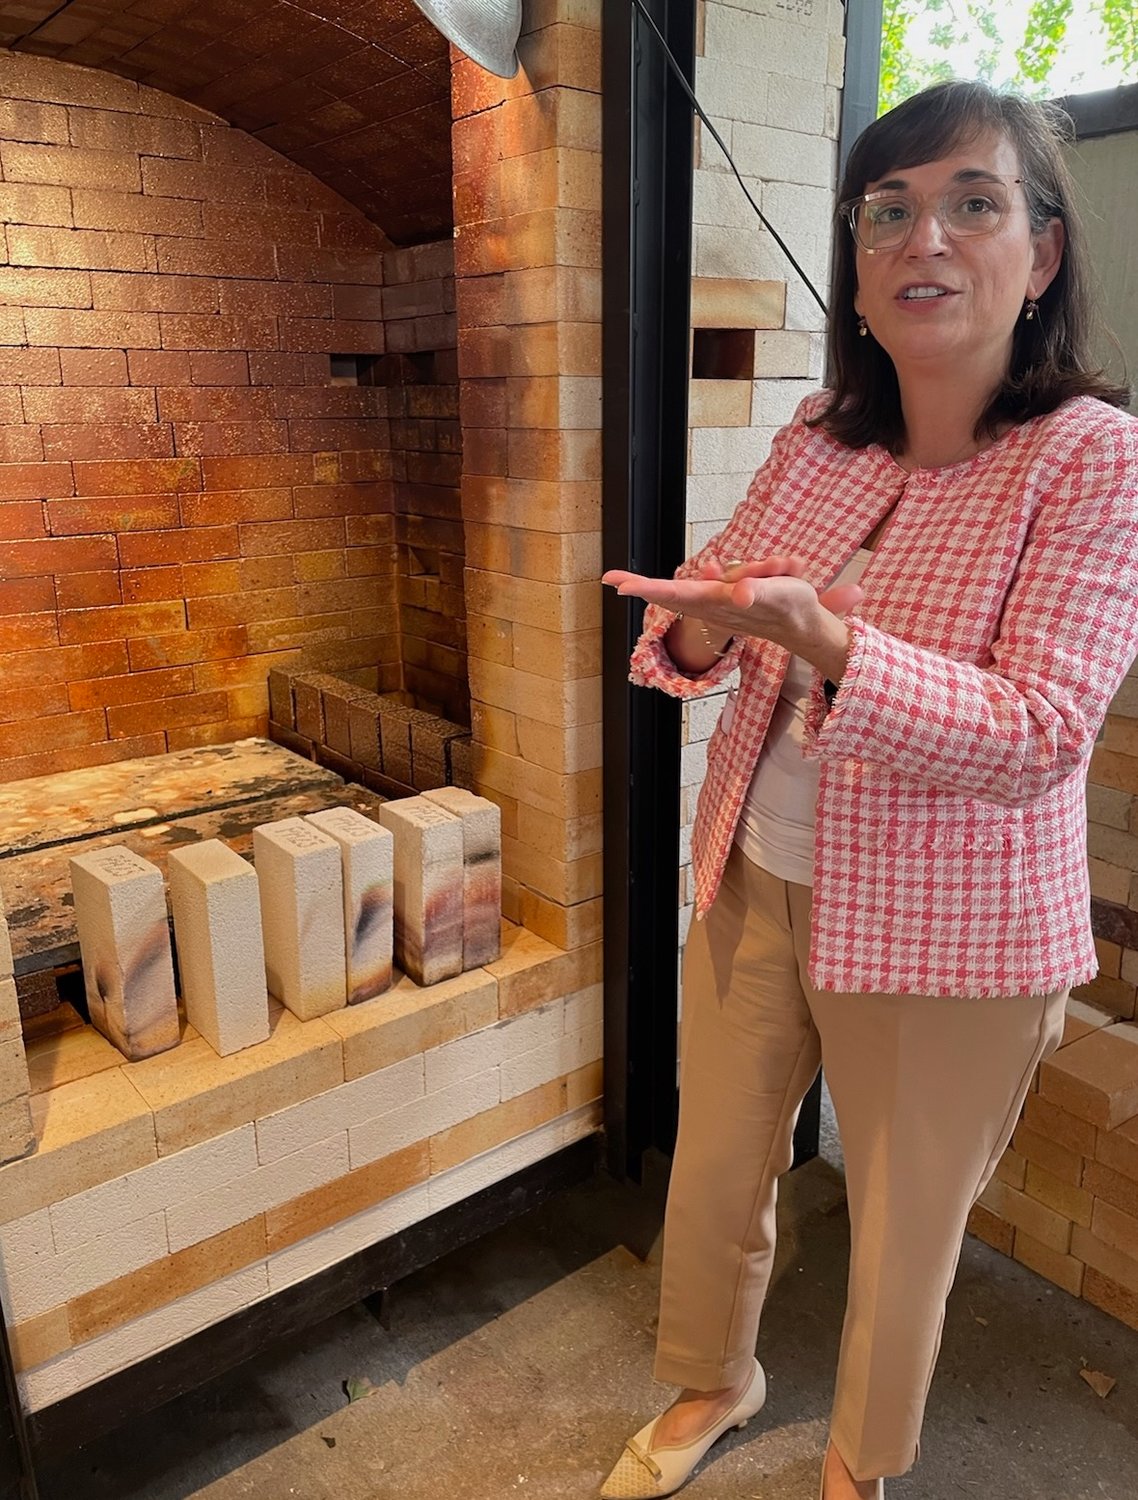 Munson-Williams-Proctor Arts Institute President and CEO Anna T. D’Ambrosio talks about the new salt kiln unveiled outside the ceramics studio Wednesday.